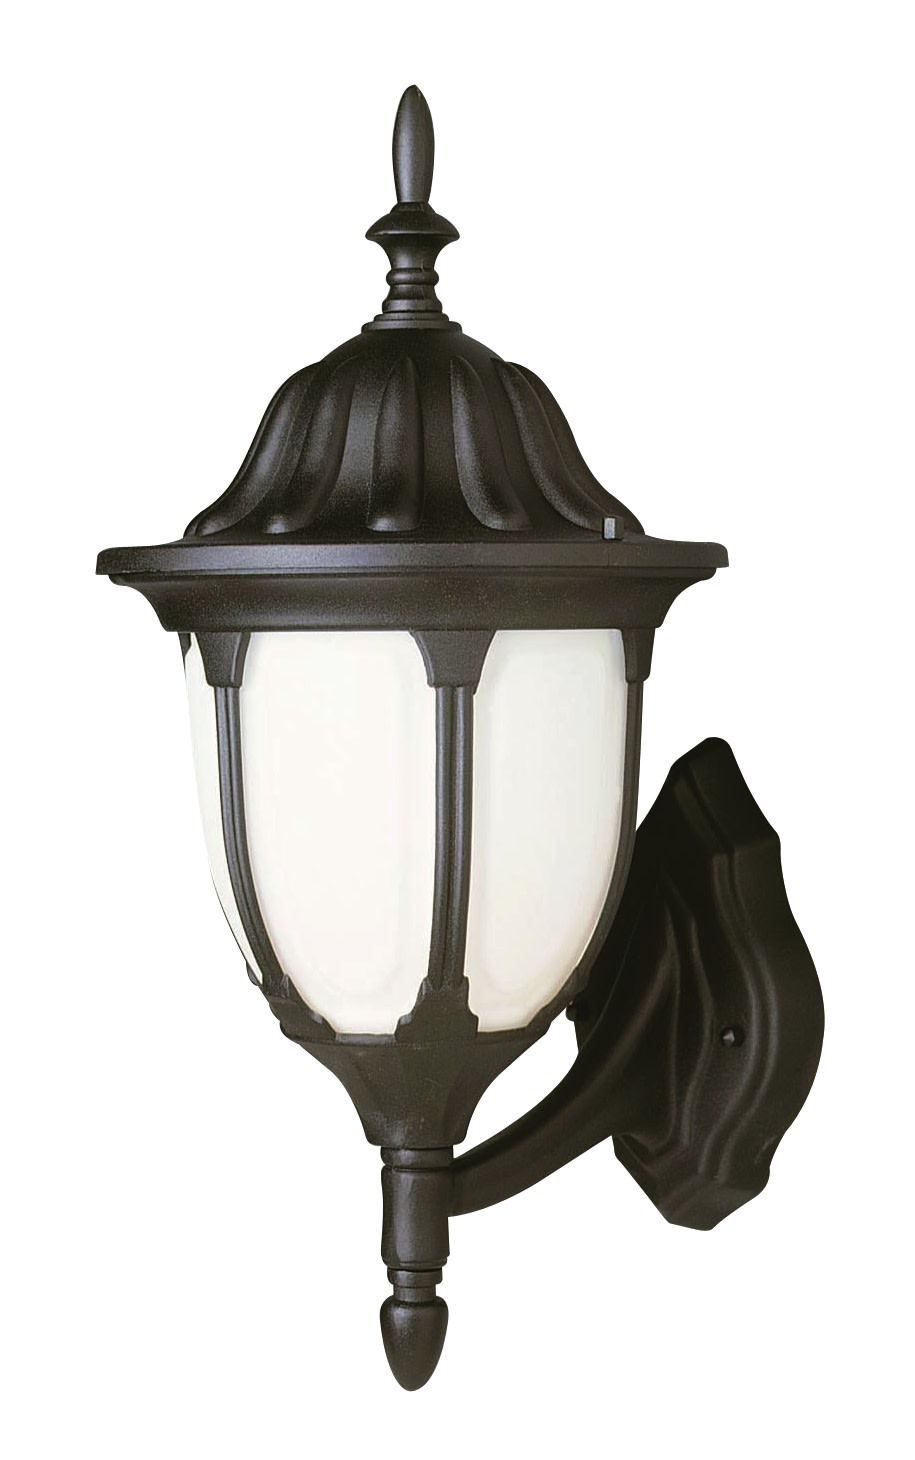 Trans Globe Lighting 4041 1 Light Up Lighting Outdoor Large Wall Sconce From The Outdoor - image 1 of 2